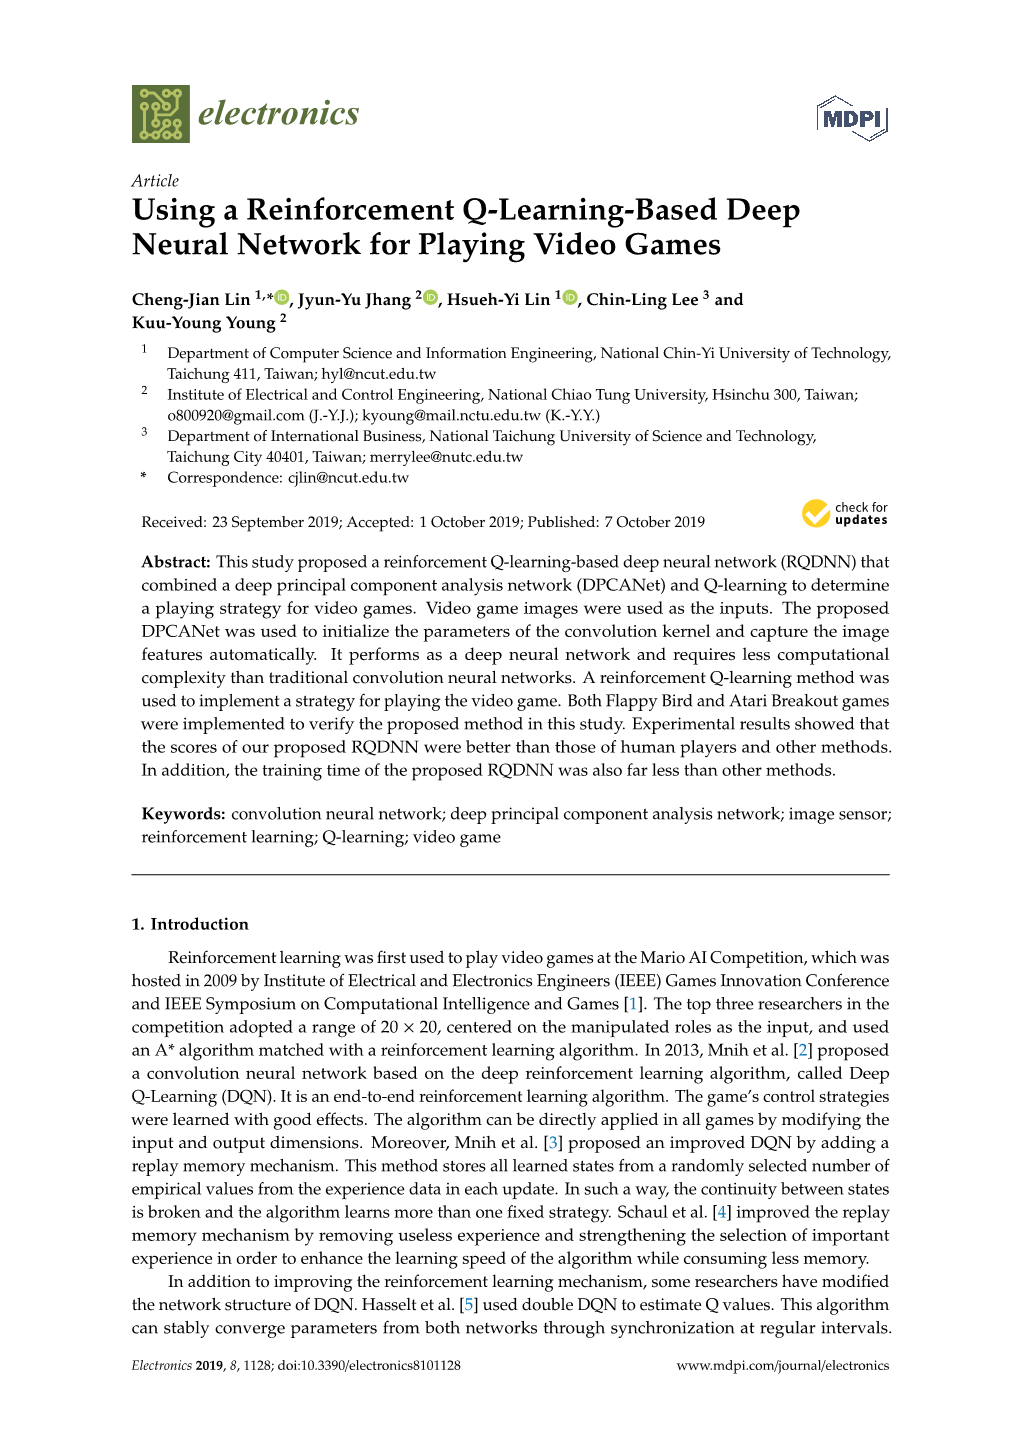 Using a Reinforcement Q-Learning-Based Deep Neural Network for Playing Video Games